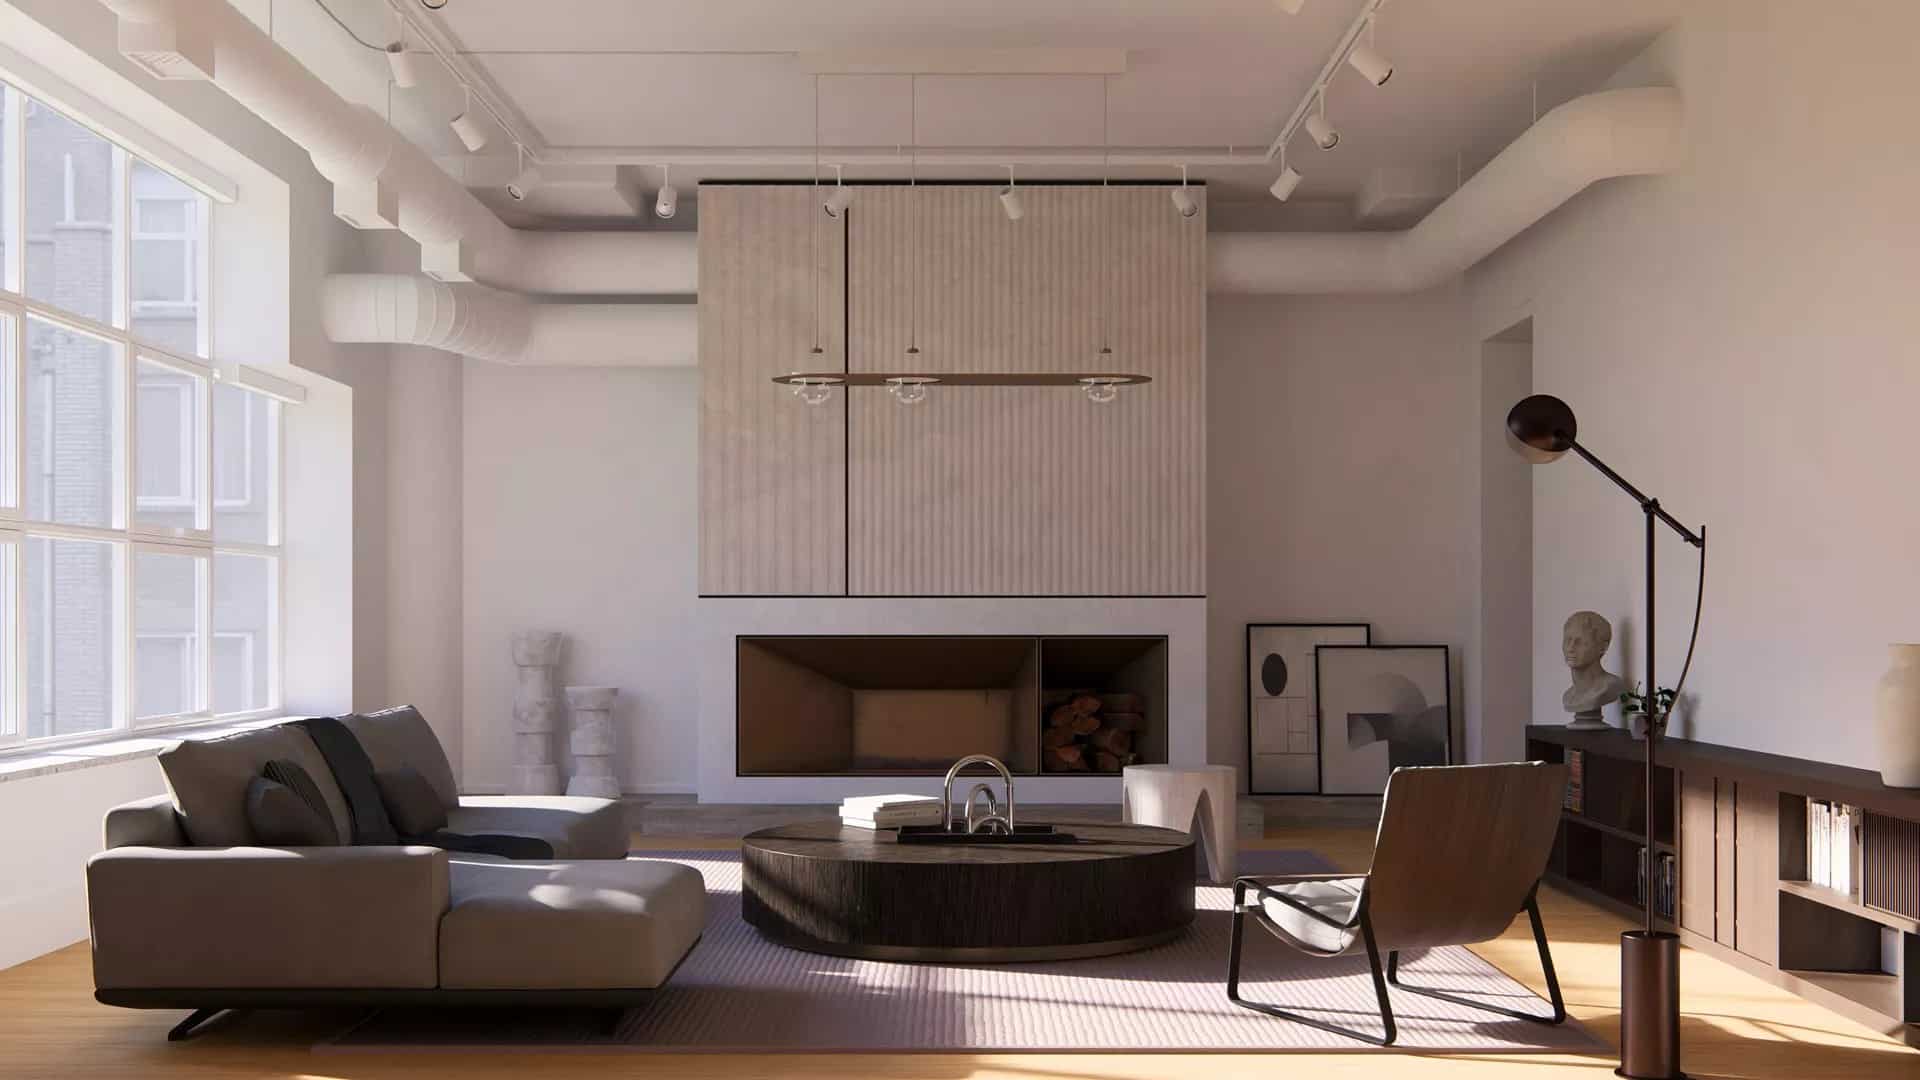 Ray tracing comes to Lumion 2023 Architosh